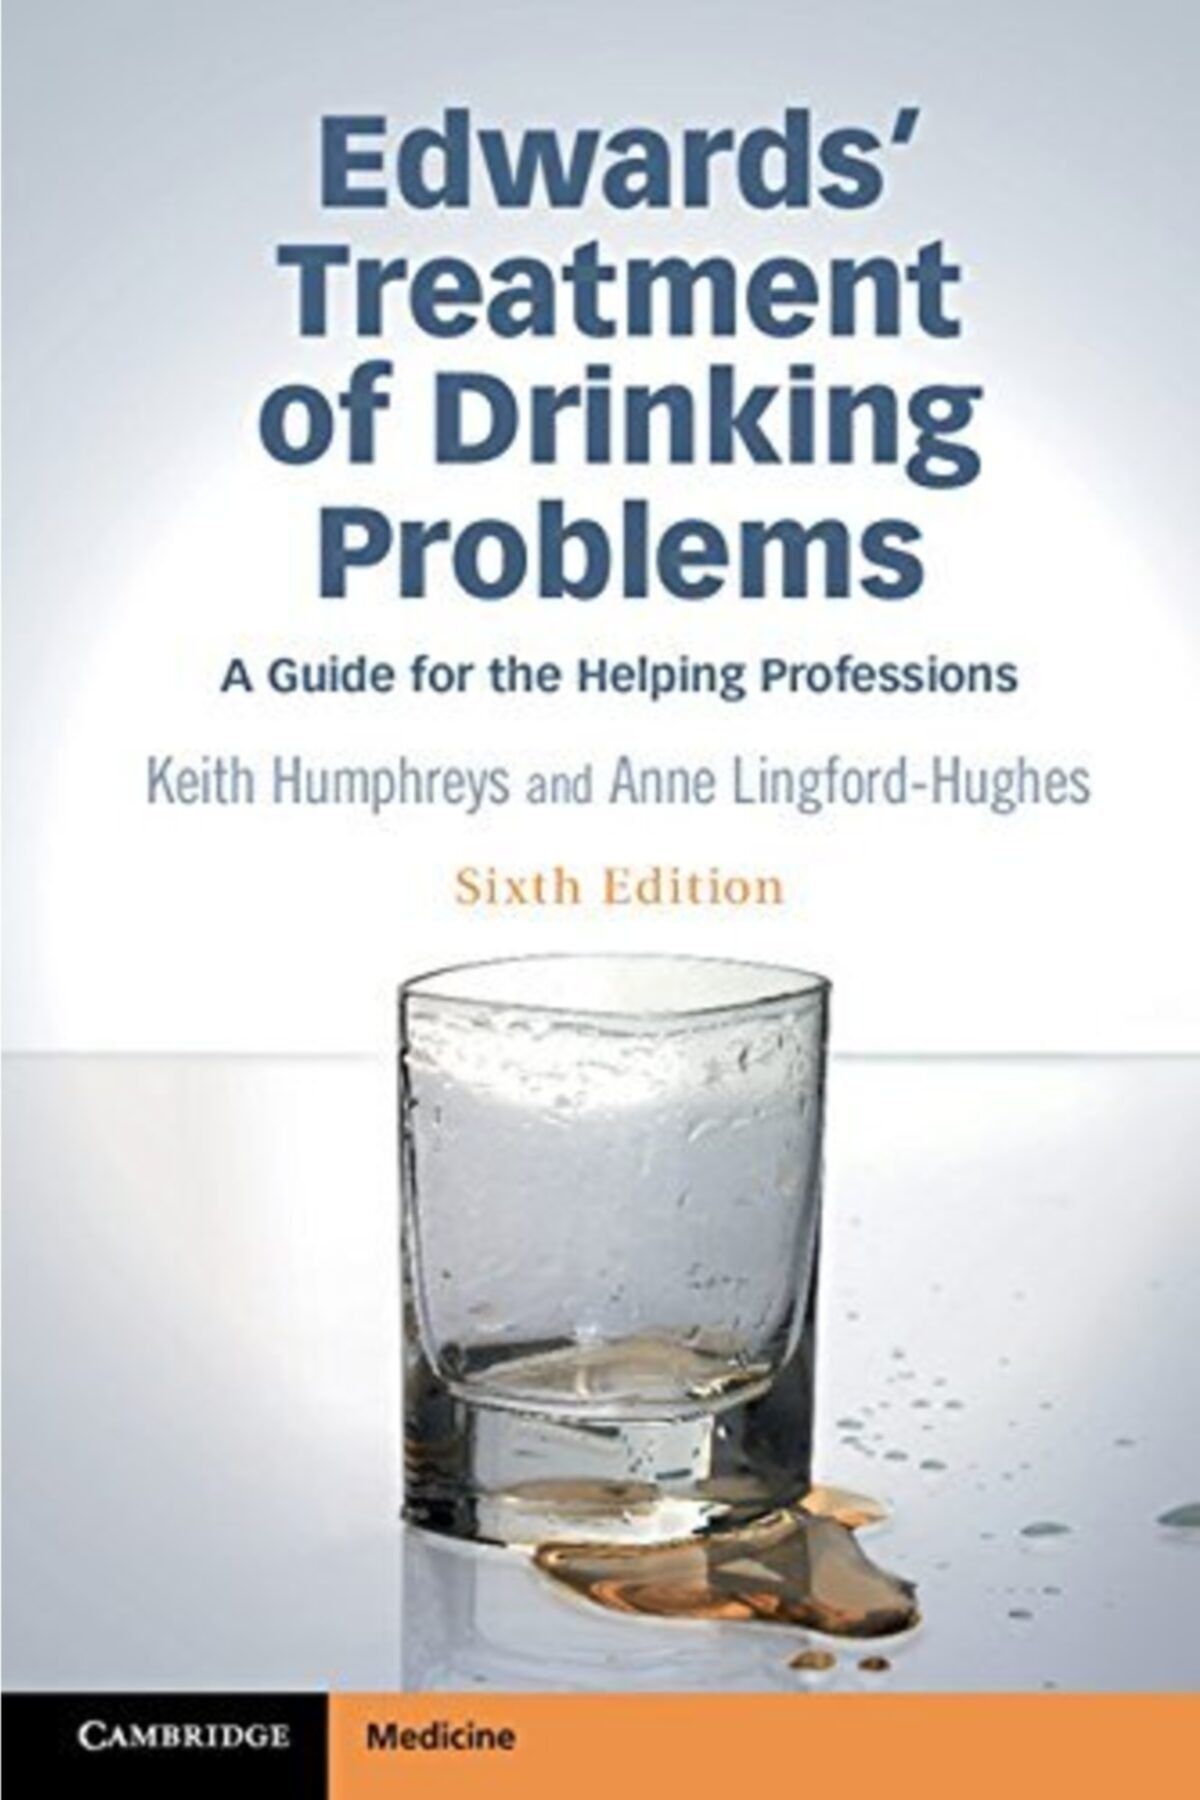 Ema Tıp Kitabevi Vedwards' Treatment Of Drinking Problems: A Guide For The Helping Professions